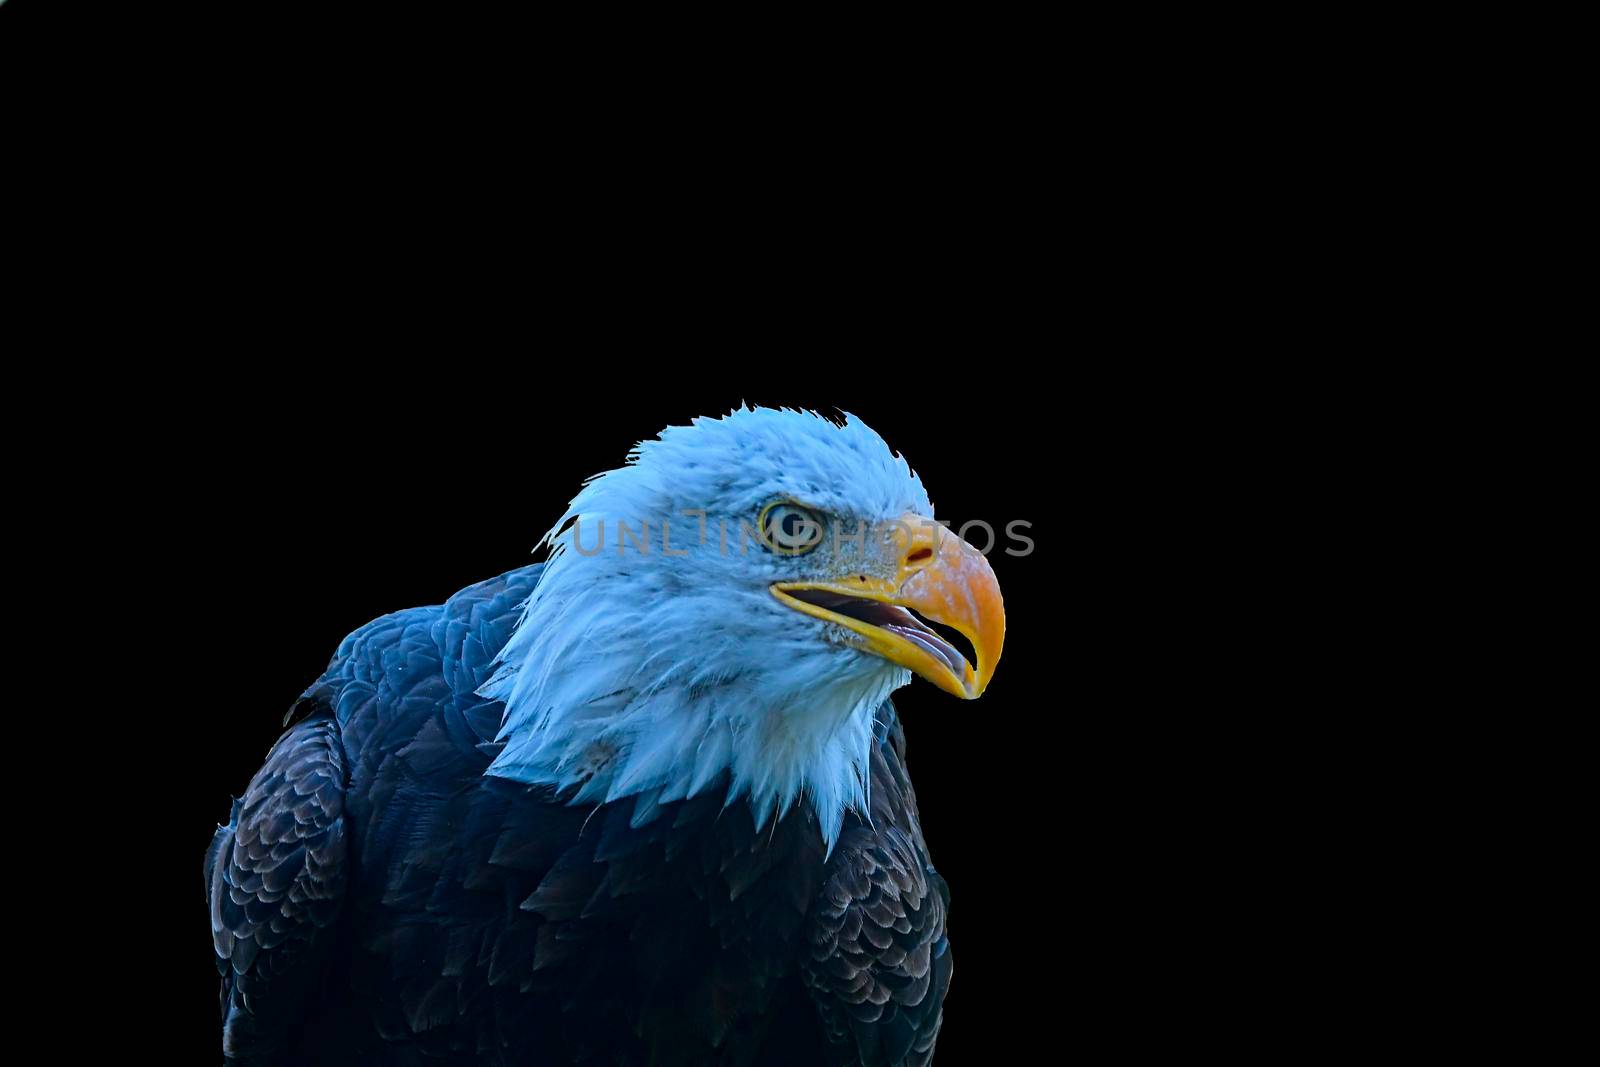 The bald eagle - Haliaeetus leucocephalus - is a bird of prey found in North America. The bald eagle is the national bird of the United States of America. Bald eagle on black background and big copy space.